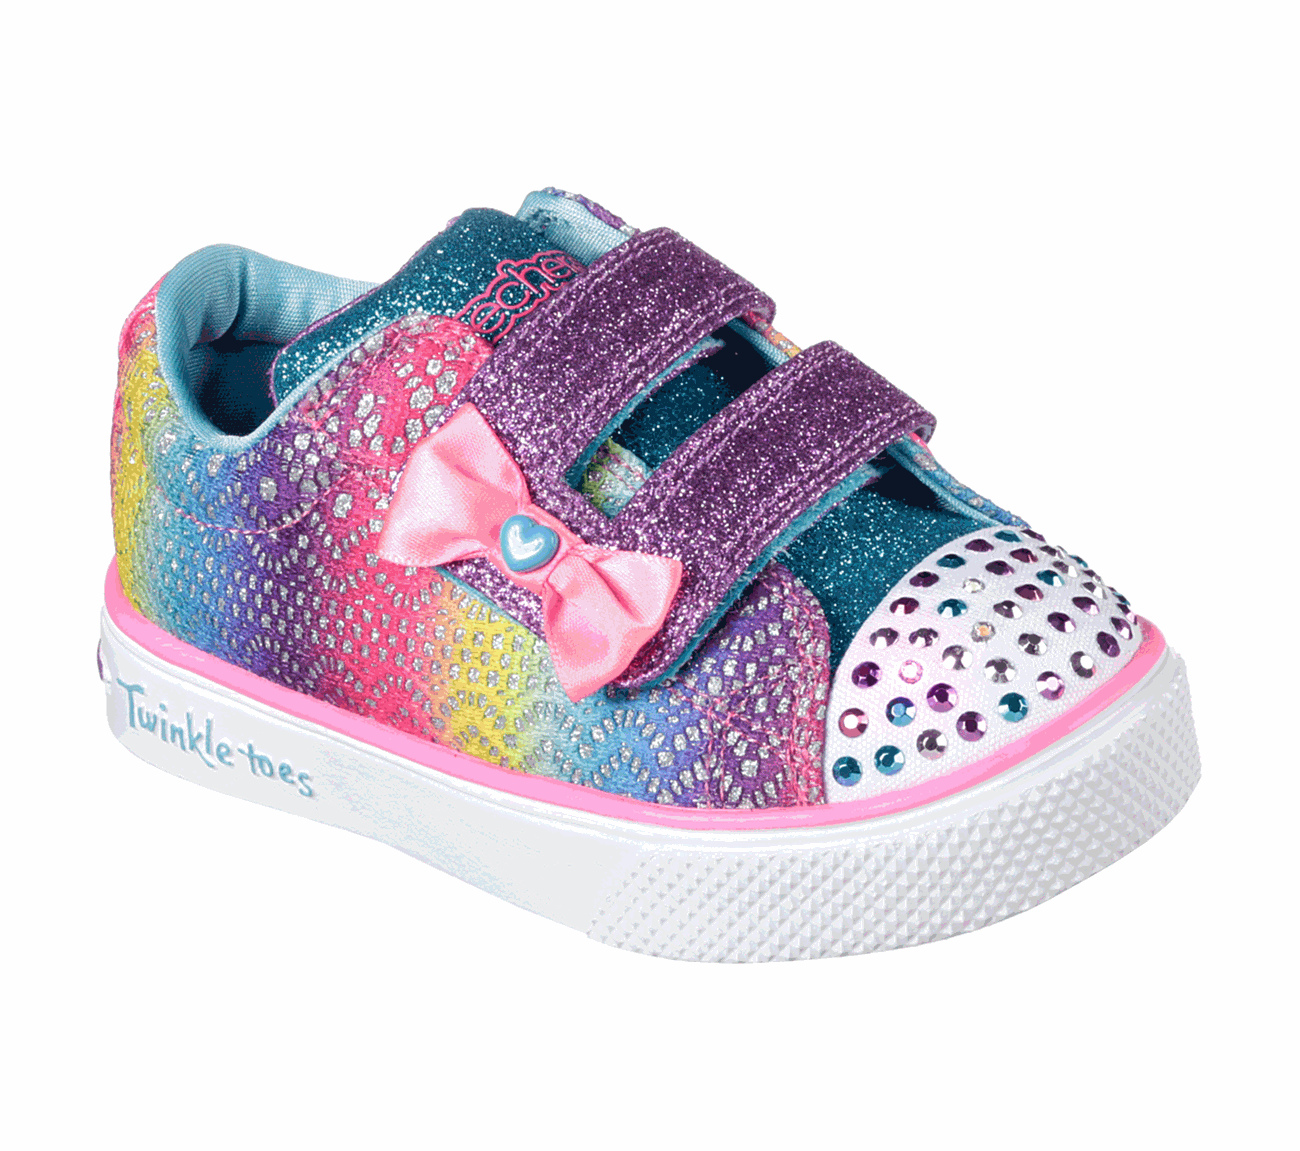 Colorful Crochets Twinkle Toes Shoes